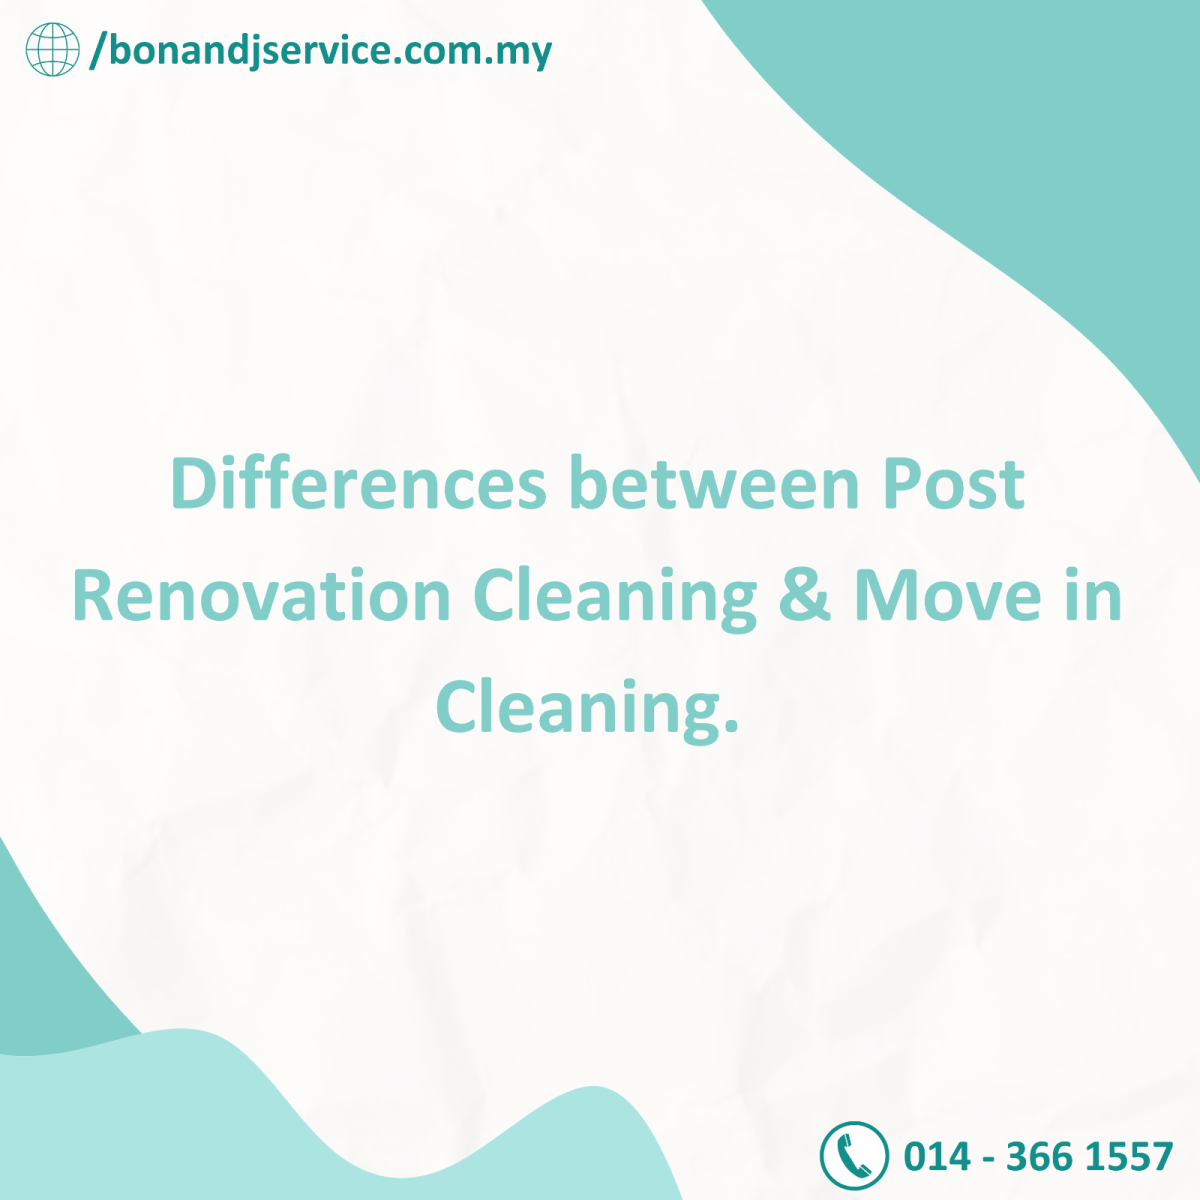 Differences between Post Renovation Cleaning & Move in Cleaning